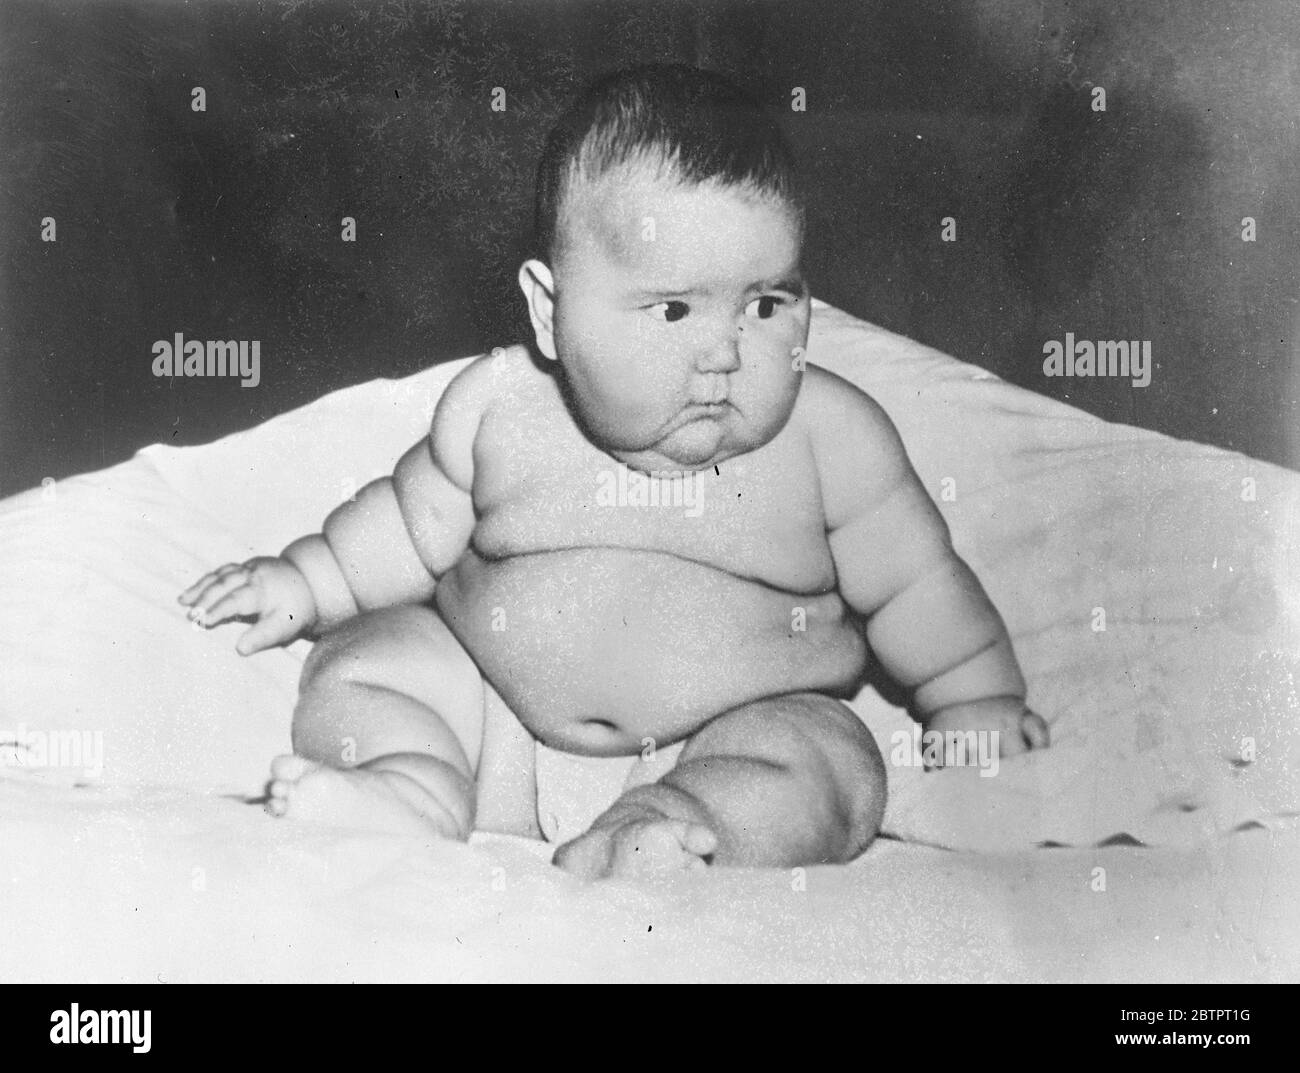 18 months to 2 years old Black and White Stock Photos & Images - Alamy